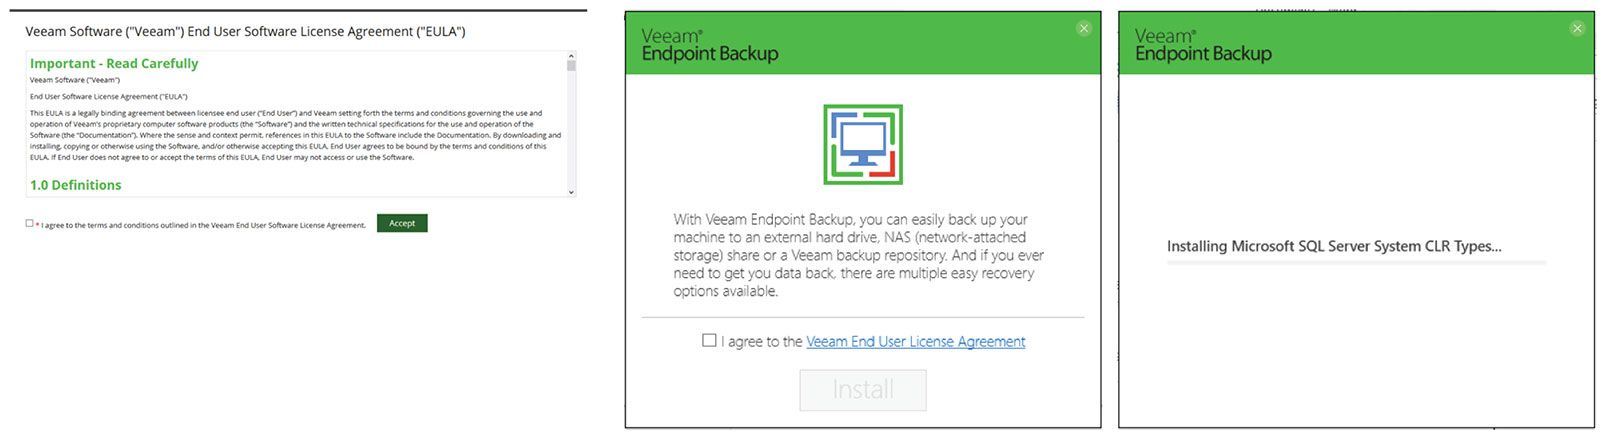 howto-proteger--pc-veeam-endpoint-protection-5